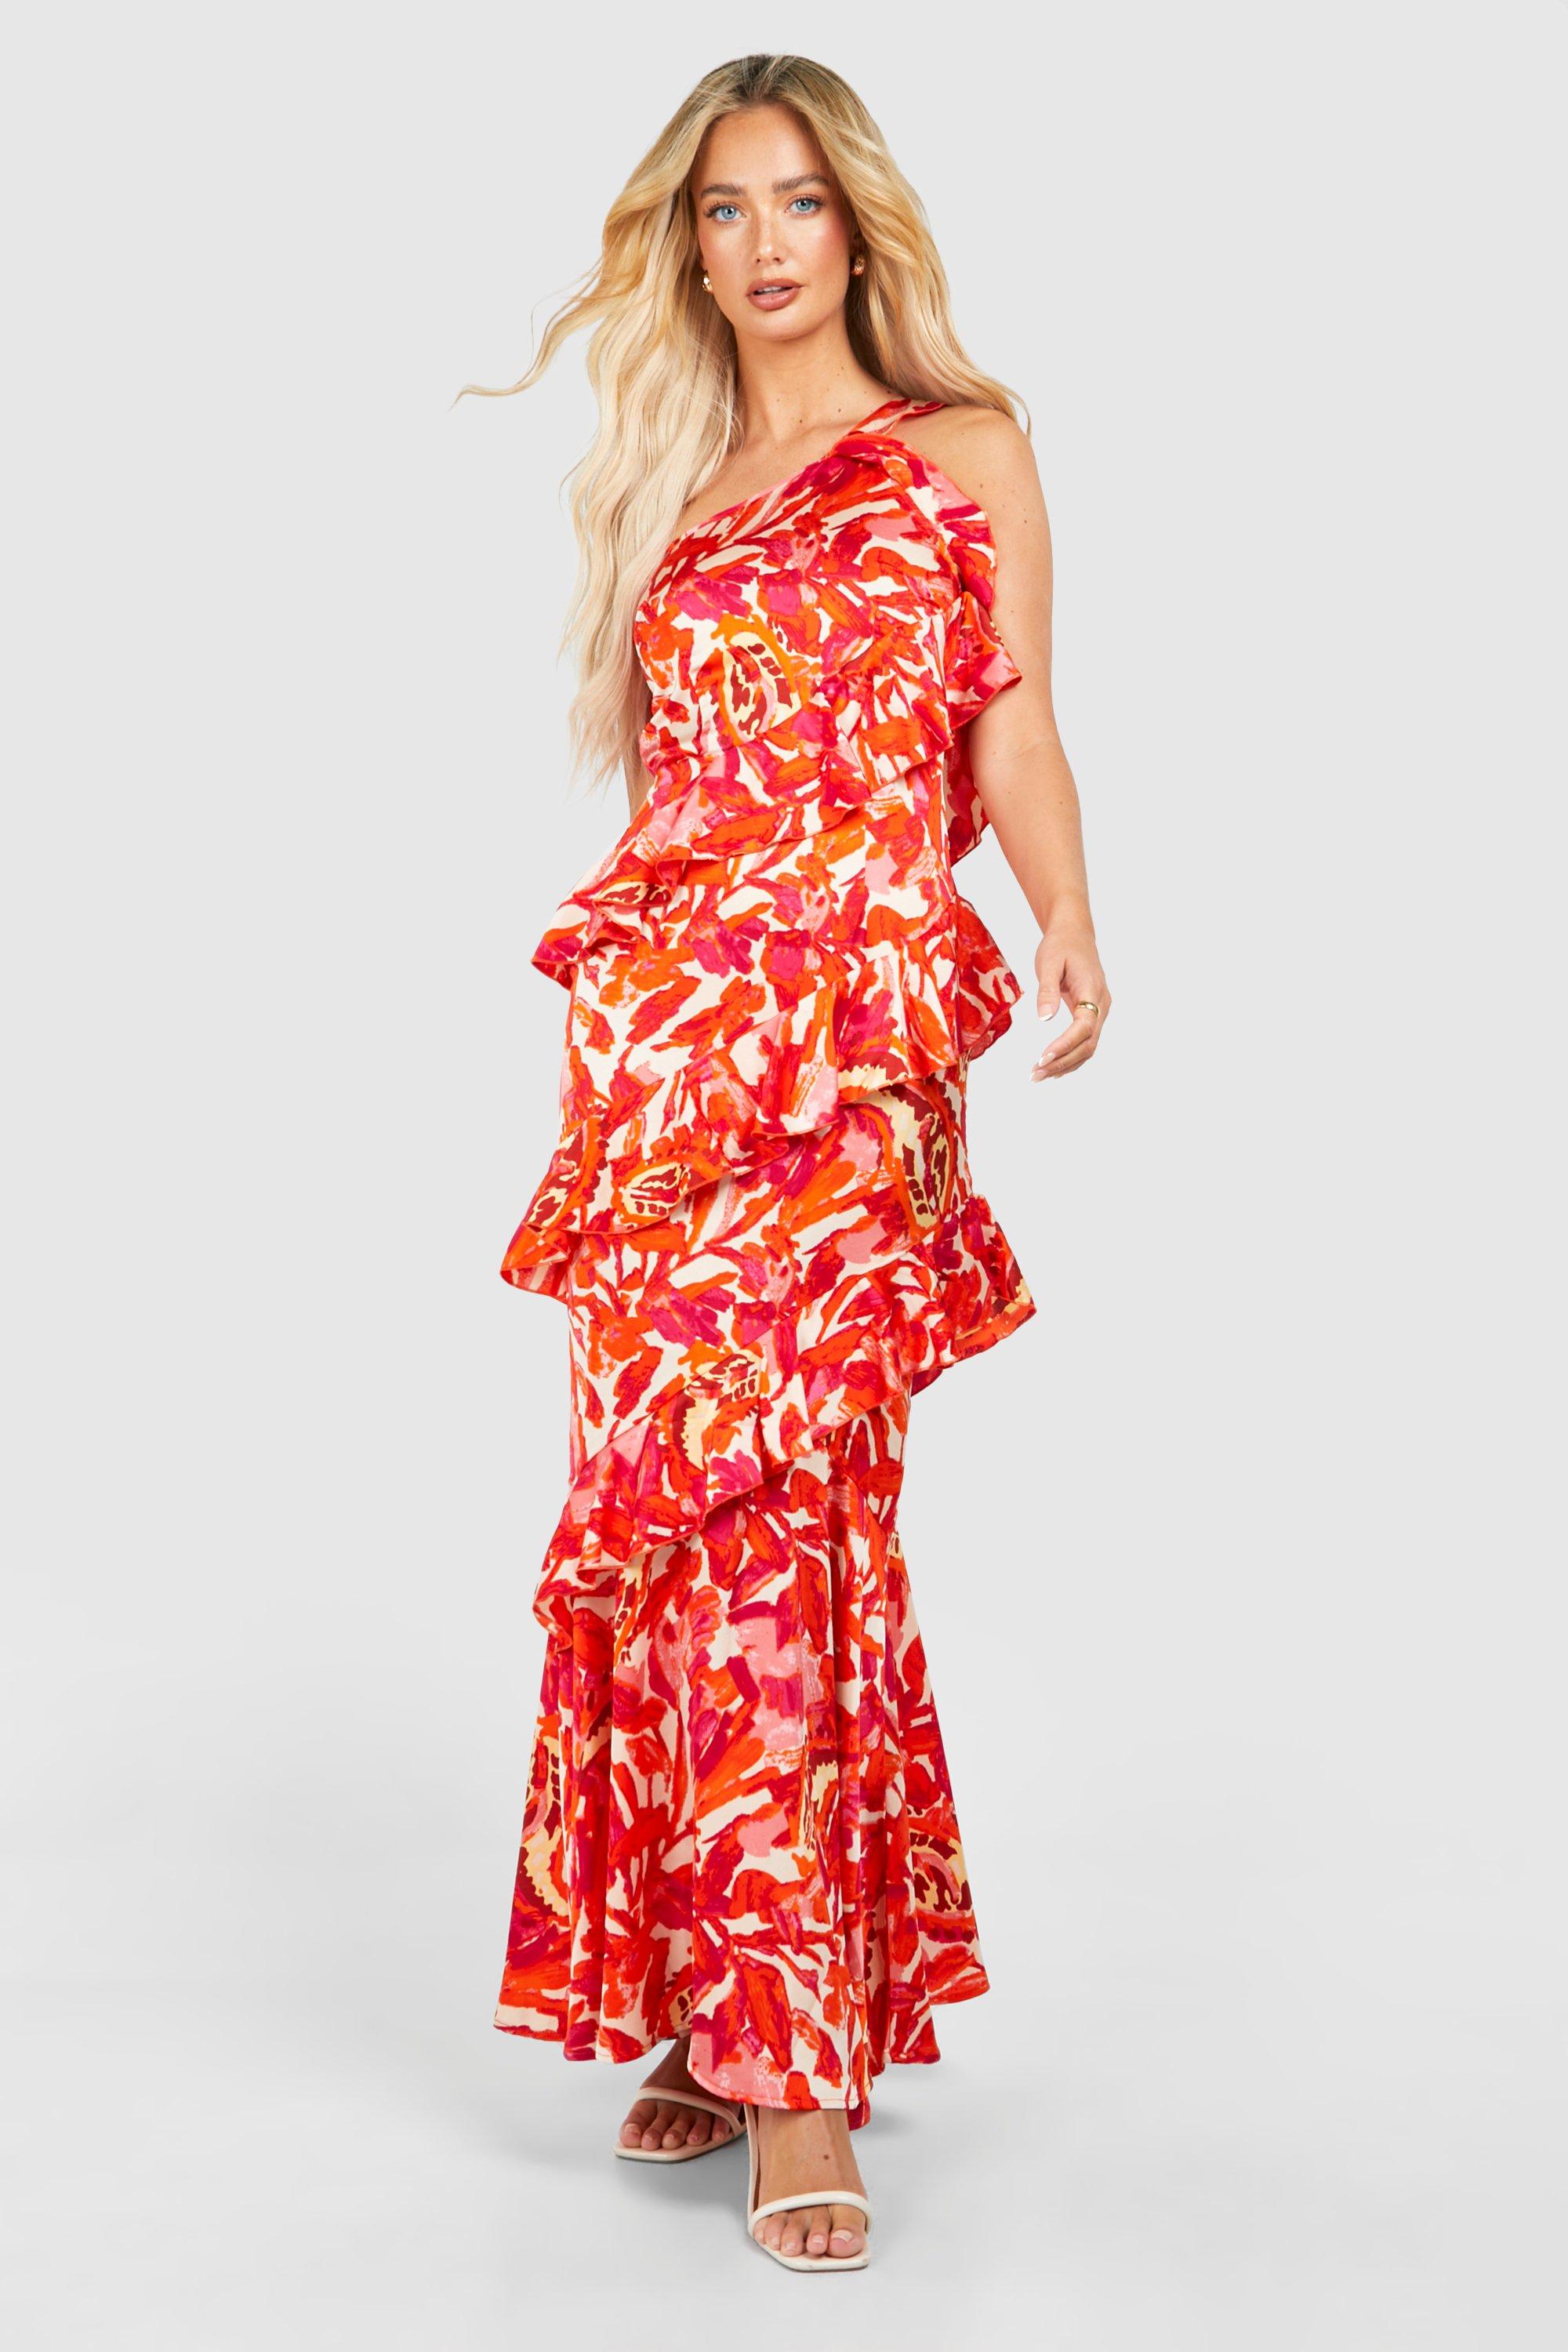 Image of Floral Print One Shoulder Ruffle Maxi Dress, Pink